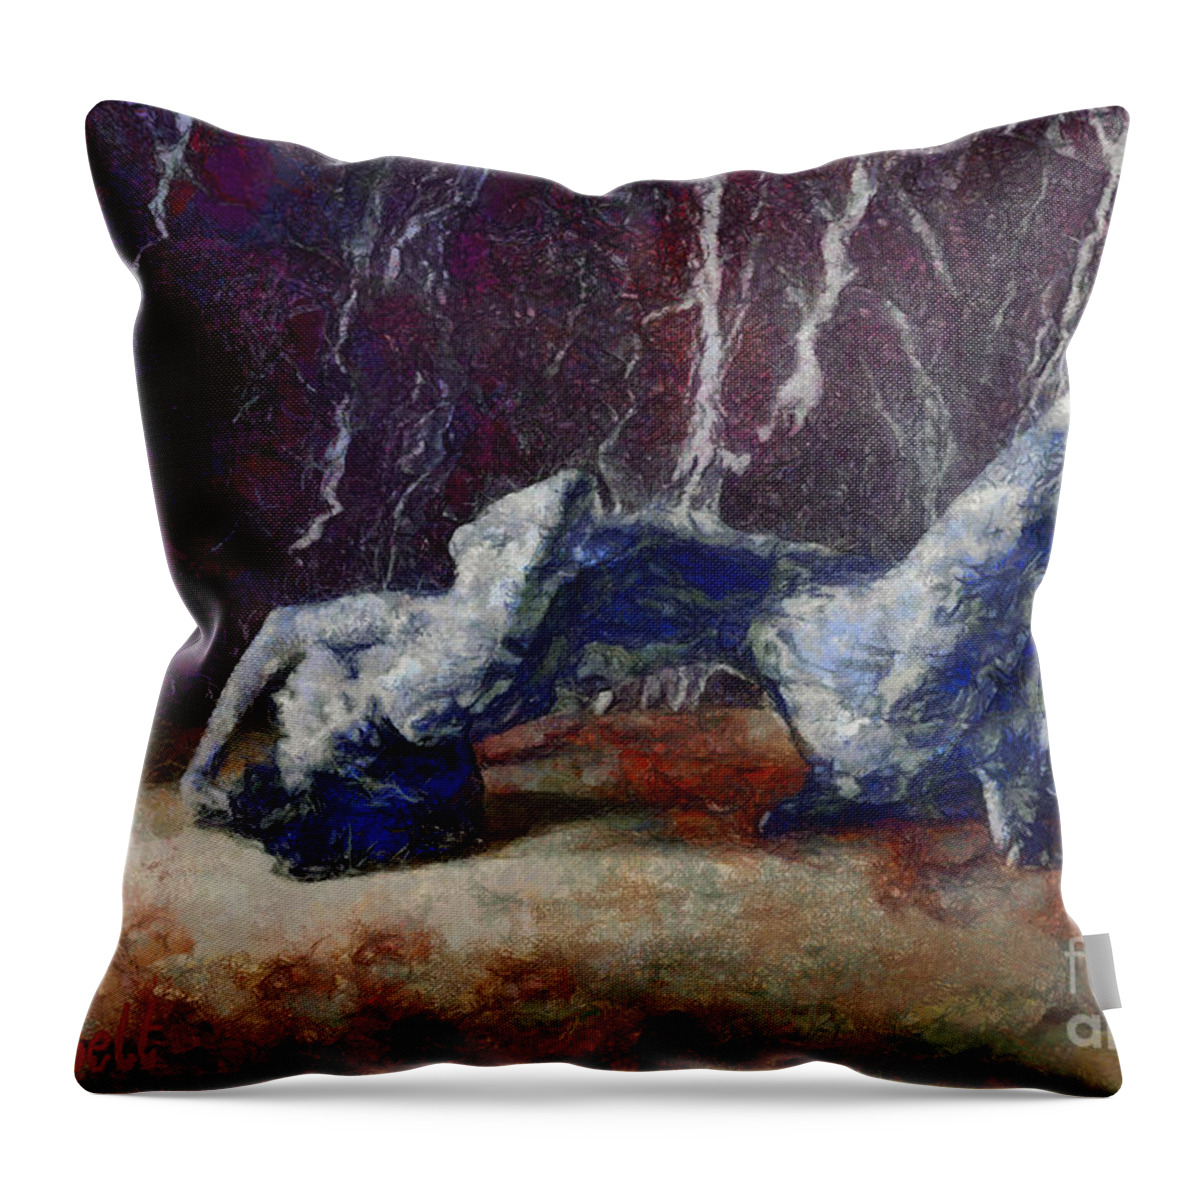 Female Throw Pillow featuring the digital art Fantasy Pose I by Humphrey Isselt